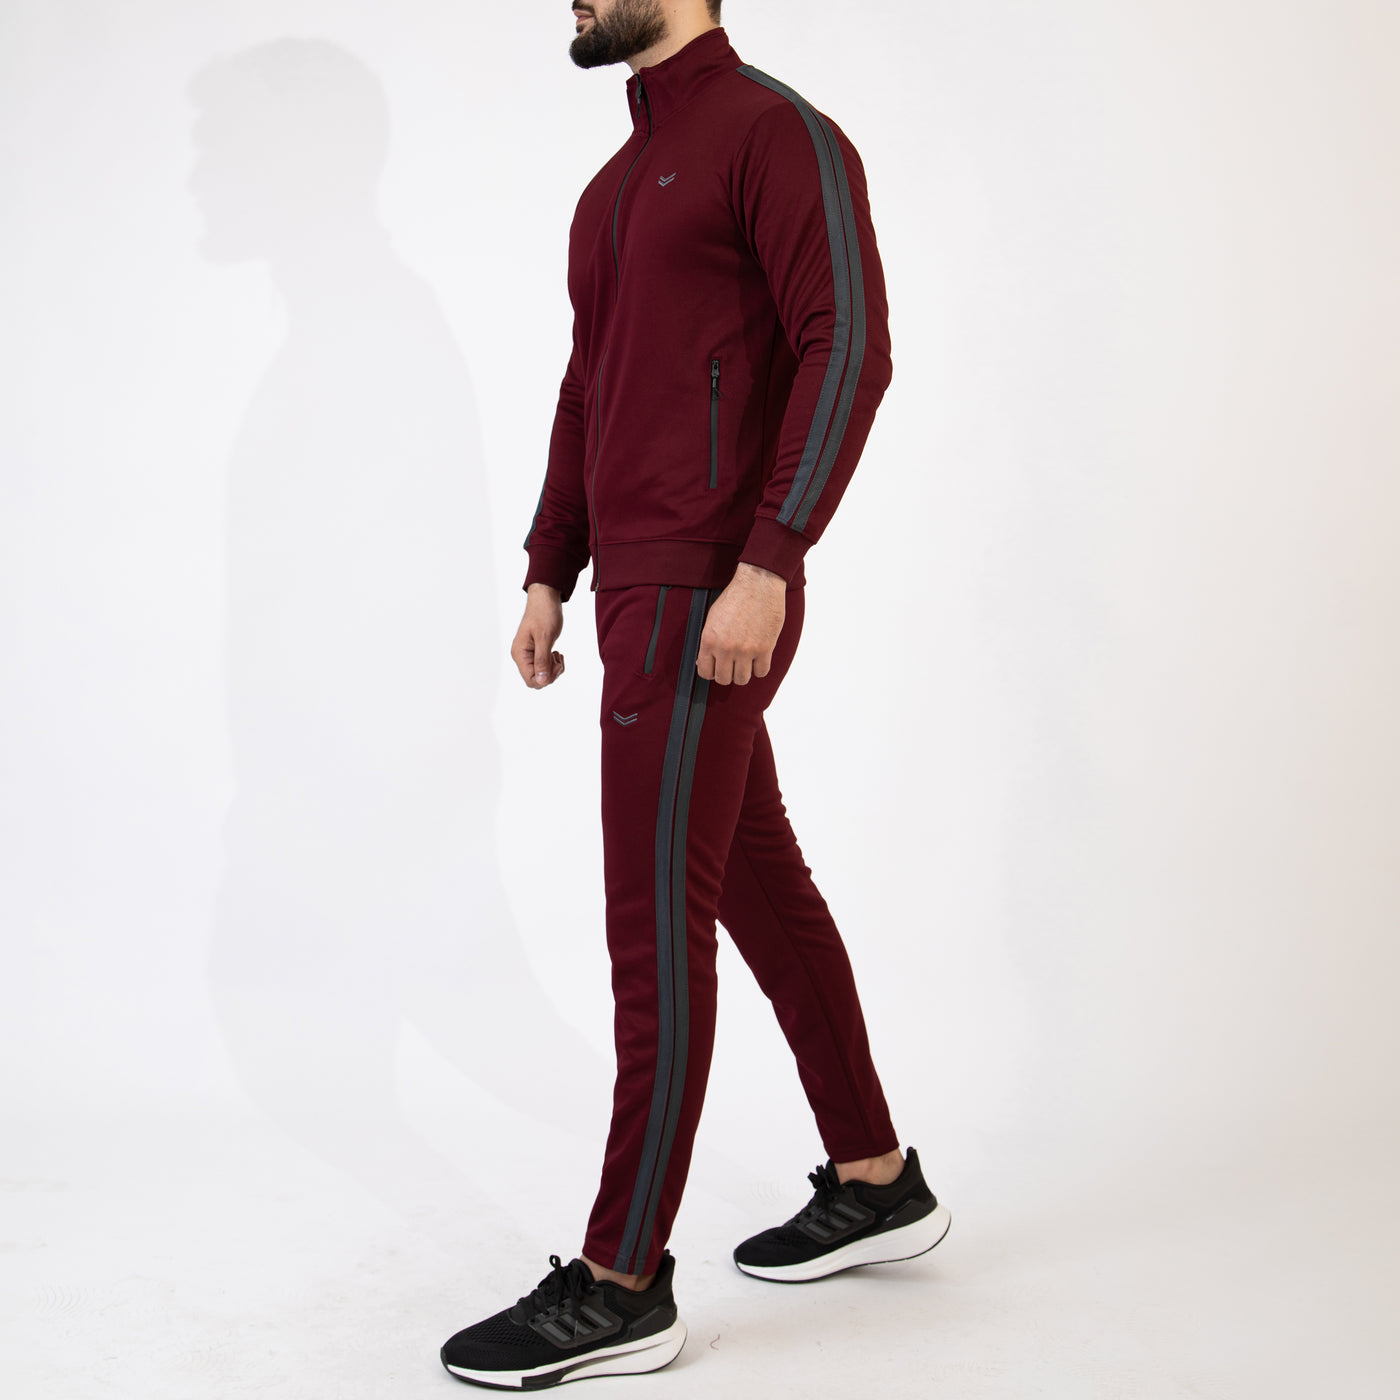 Maroon Mock-Neck Zipper Tracksuit with Two Gray Stripes